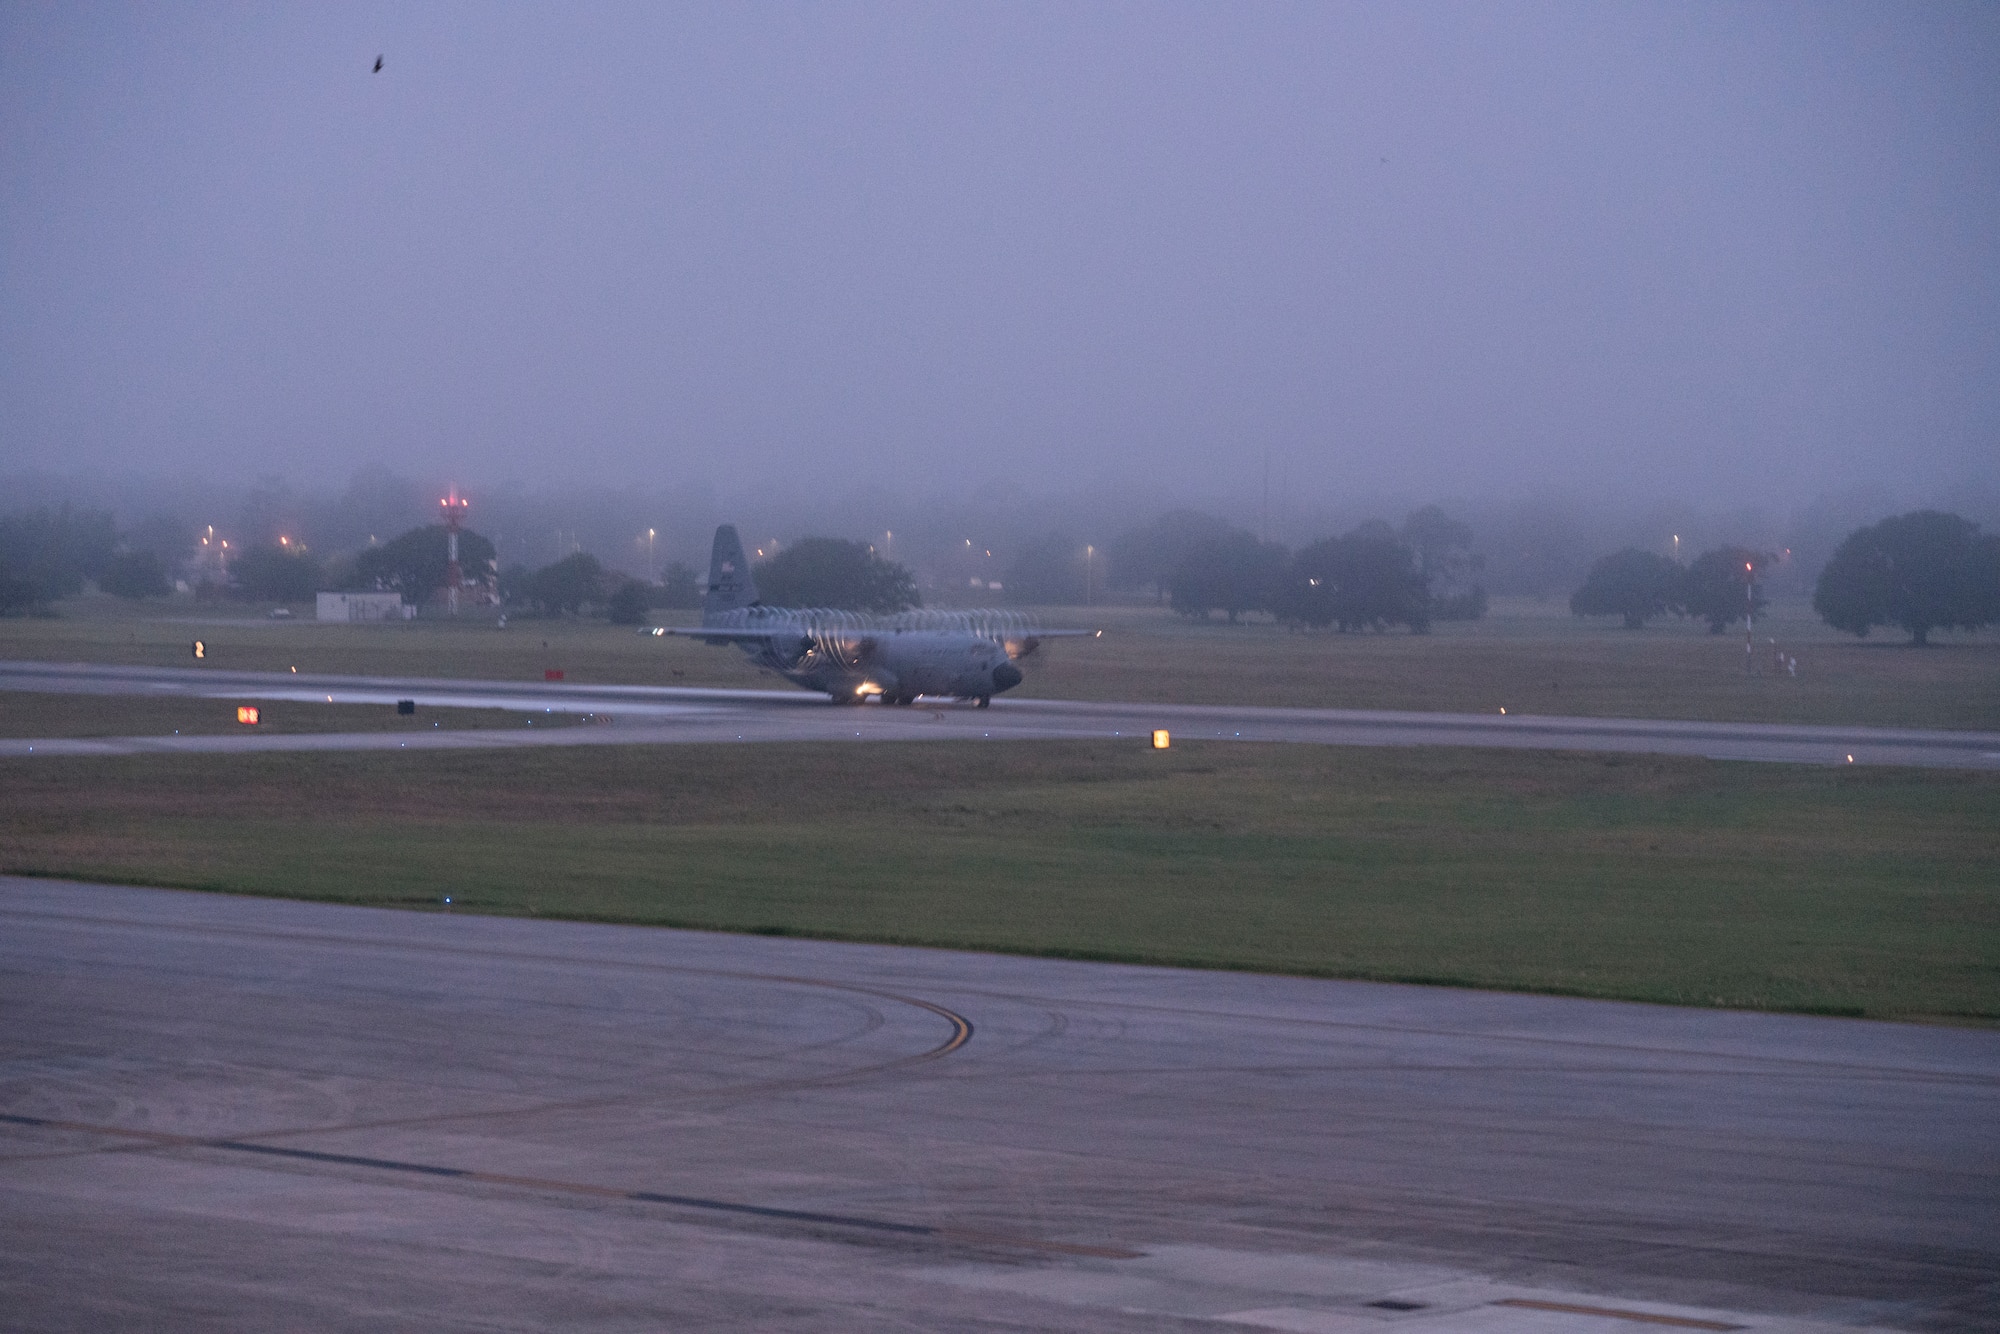 A WC-130J Super Hercules aircraft from 53rd Weather Reconnaissance Squadron takes off May 16, at Keesler Air Force Base, Miss. The Hurricane Hunters departed today on their first storm tasking of the 2020 Atlantic hurricane season to investigate an area for possible development into a tropical depression or storm near the Bahamas. (U.S. Air Force photo by Tech. Sgt. Christopher Carranza)